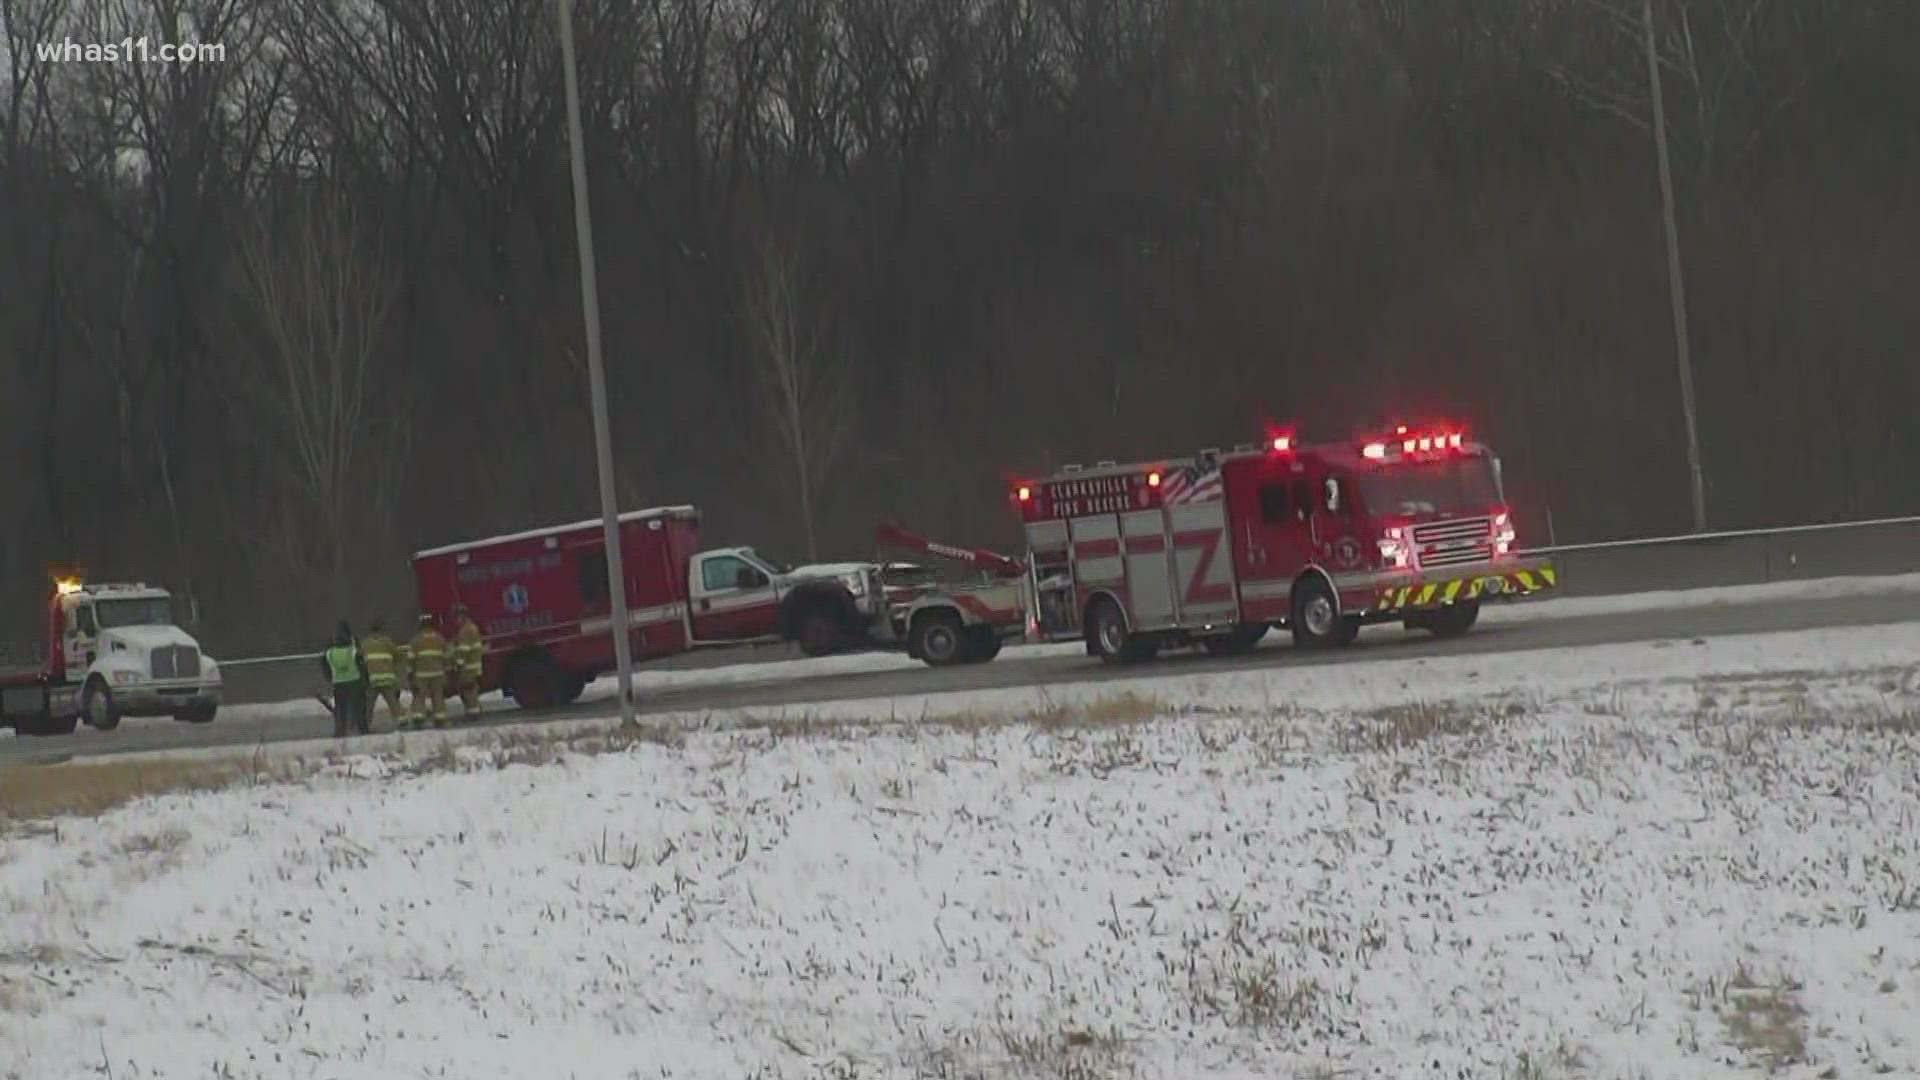 An ambulance carrying a patient was involved in a crash near I-265 in Clark County Friday afternoon.